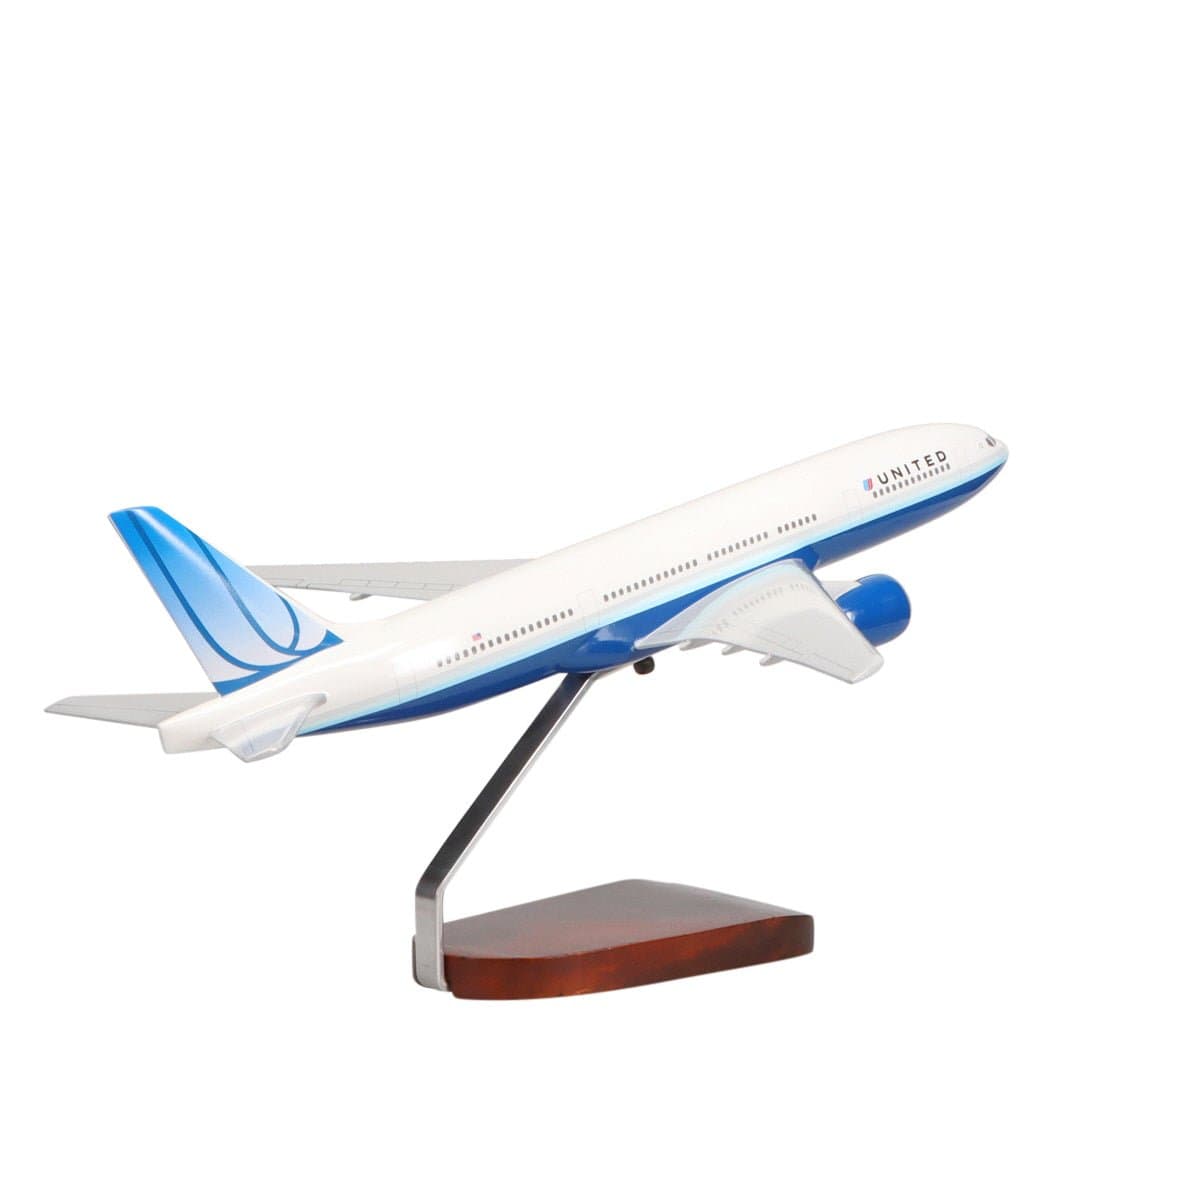 Boeing™ 777-200 United Airlines (Blue Tulip Livery) Large Mahogany Model